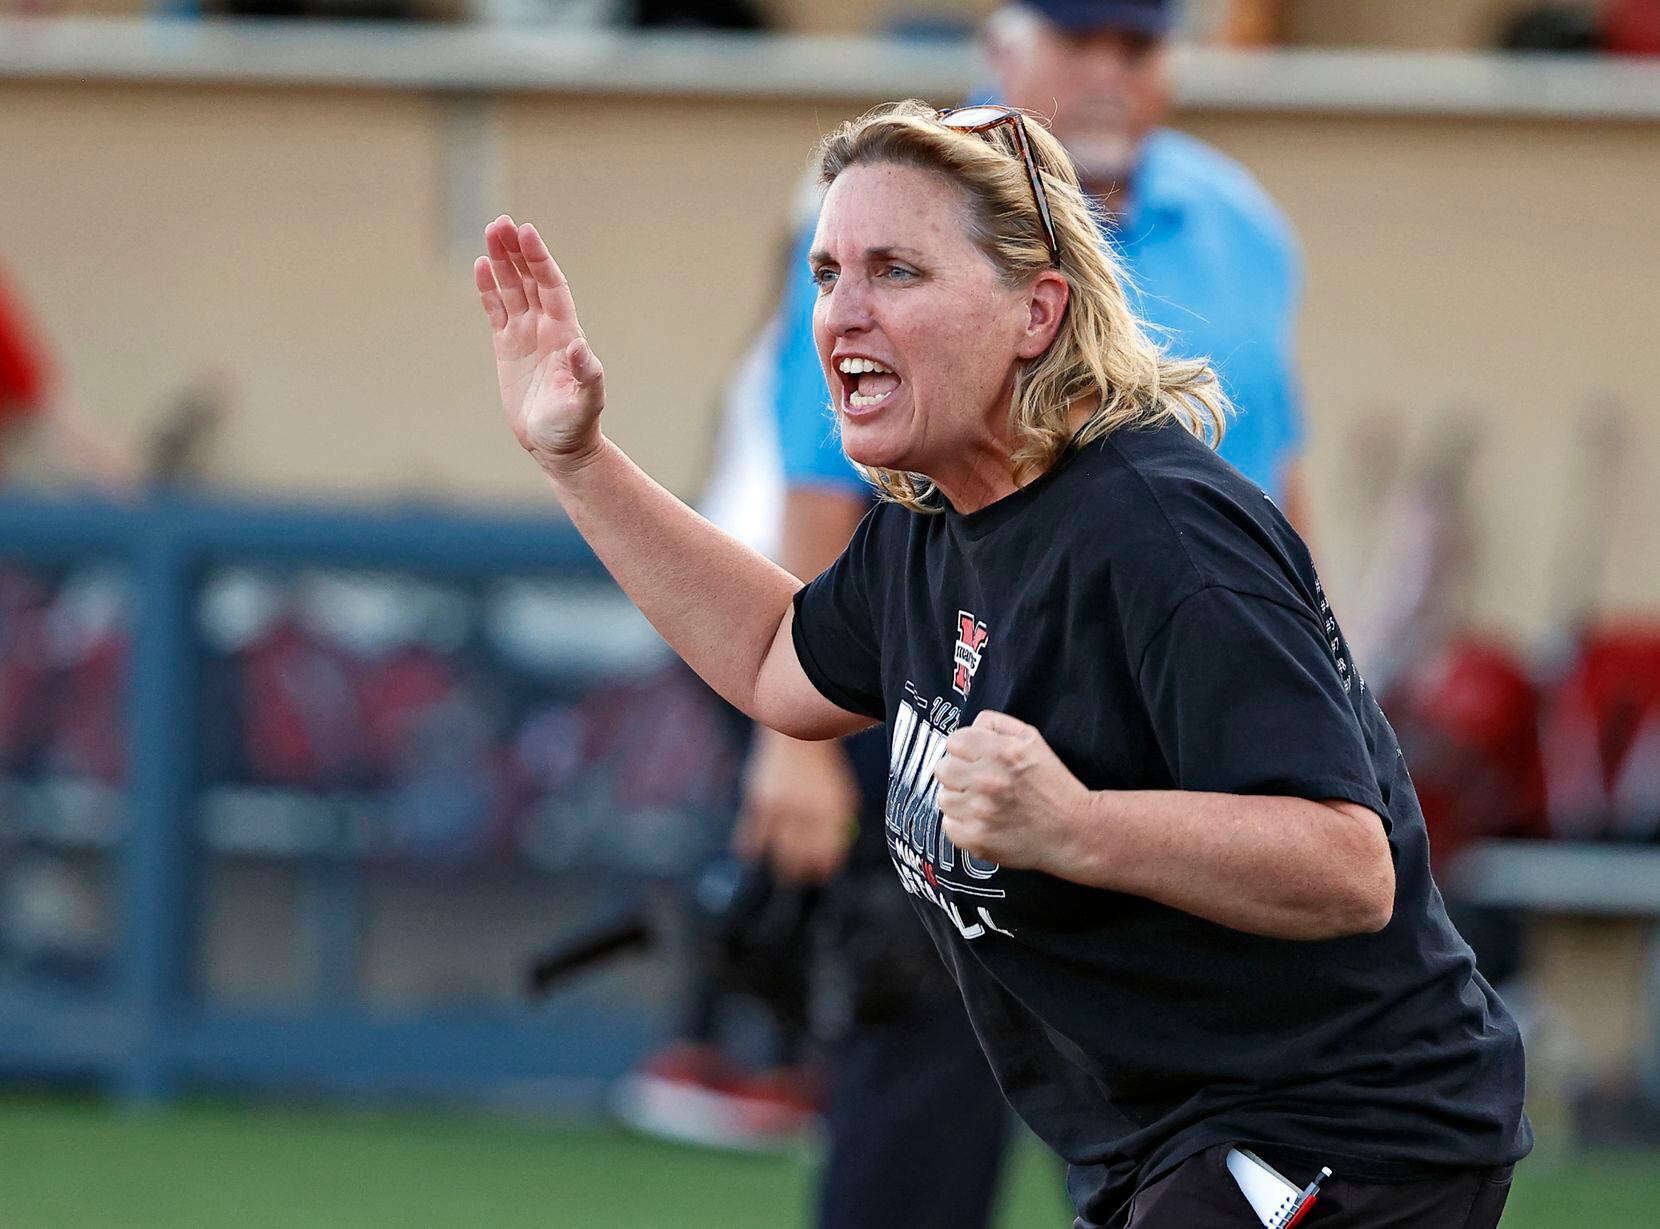 Flower Mound Marcus coach Christy Tumilty cheers as Alexa Hanish (7) hit a home run during...